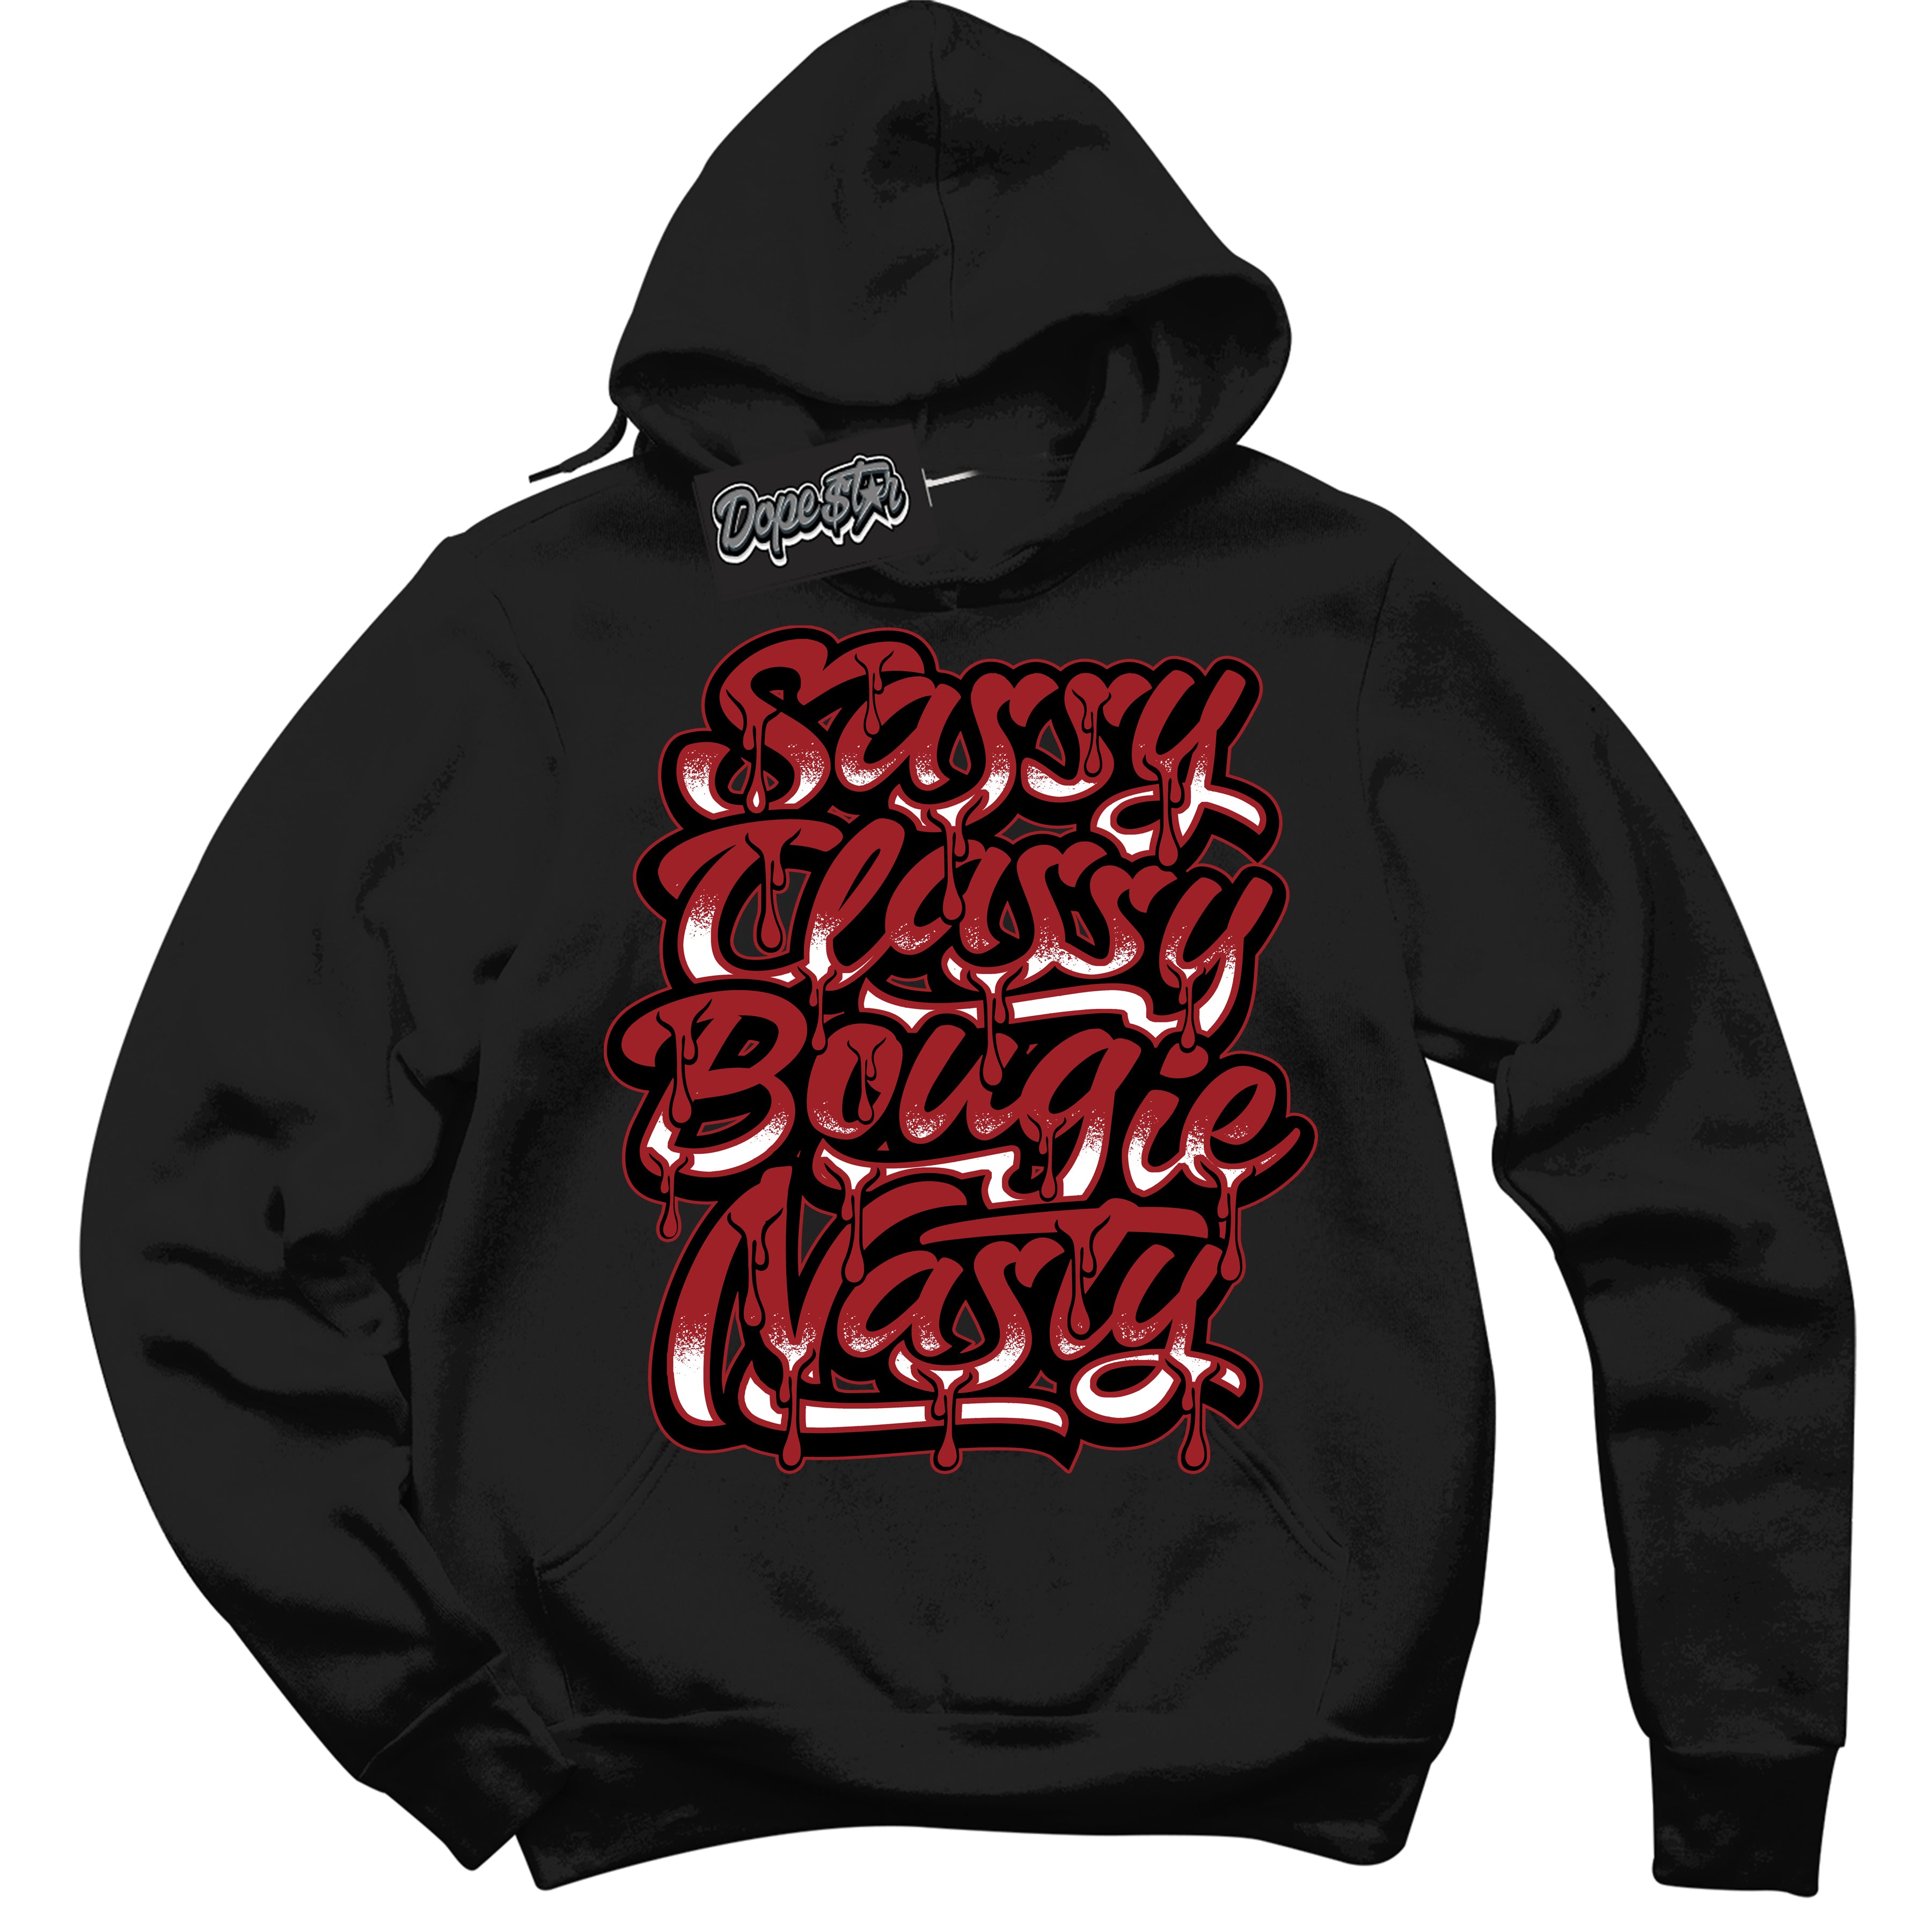 Cool Black Hoodie With “ Sassy Classy “ Design That Perfectly Matches Lost And Found 1s Sneakers